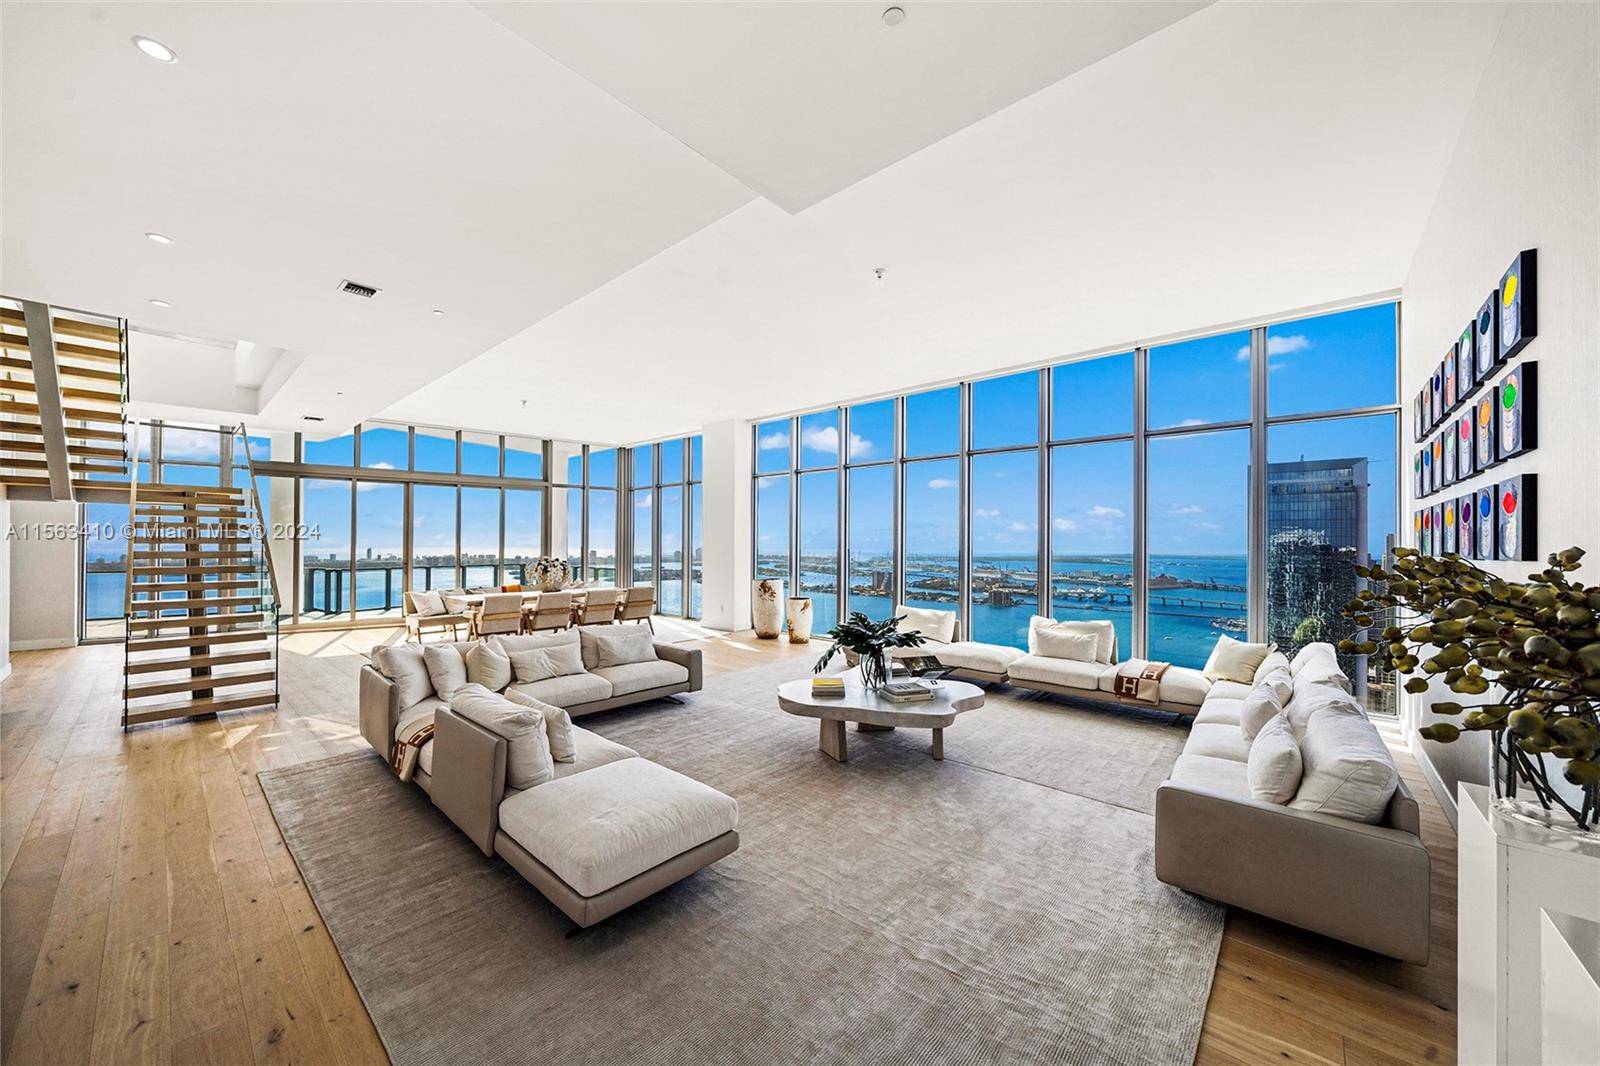 This 11, 884sf Penthouse possesses qualities that set it apart from any penthouse in Miami.